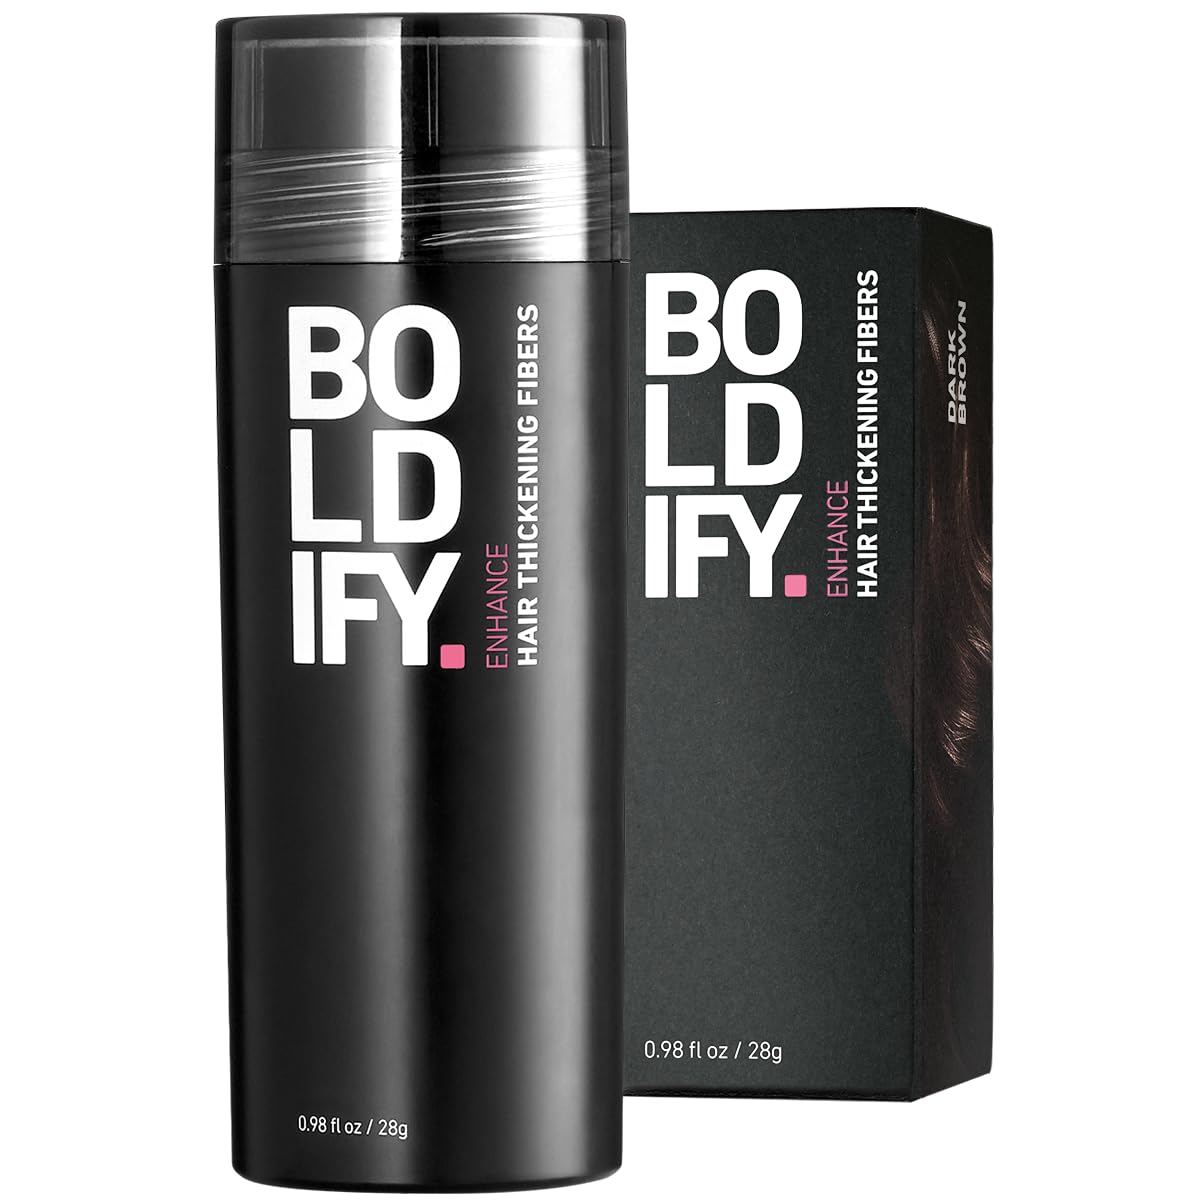 BOLDIFY Hair Fibers (28g) Fill In Fine and Thinning Hair for an Instantly Thicker & Fuller Look - Best Value & Superior Formula -14 Shades for Women & Men - DARK BROWN